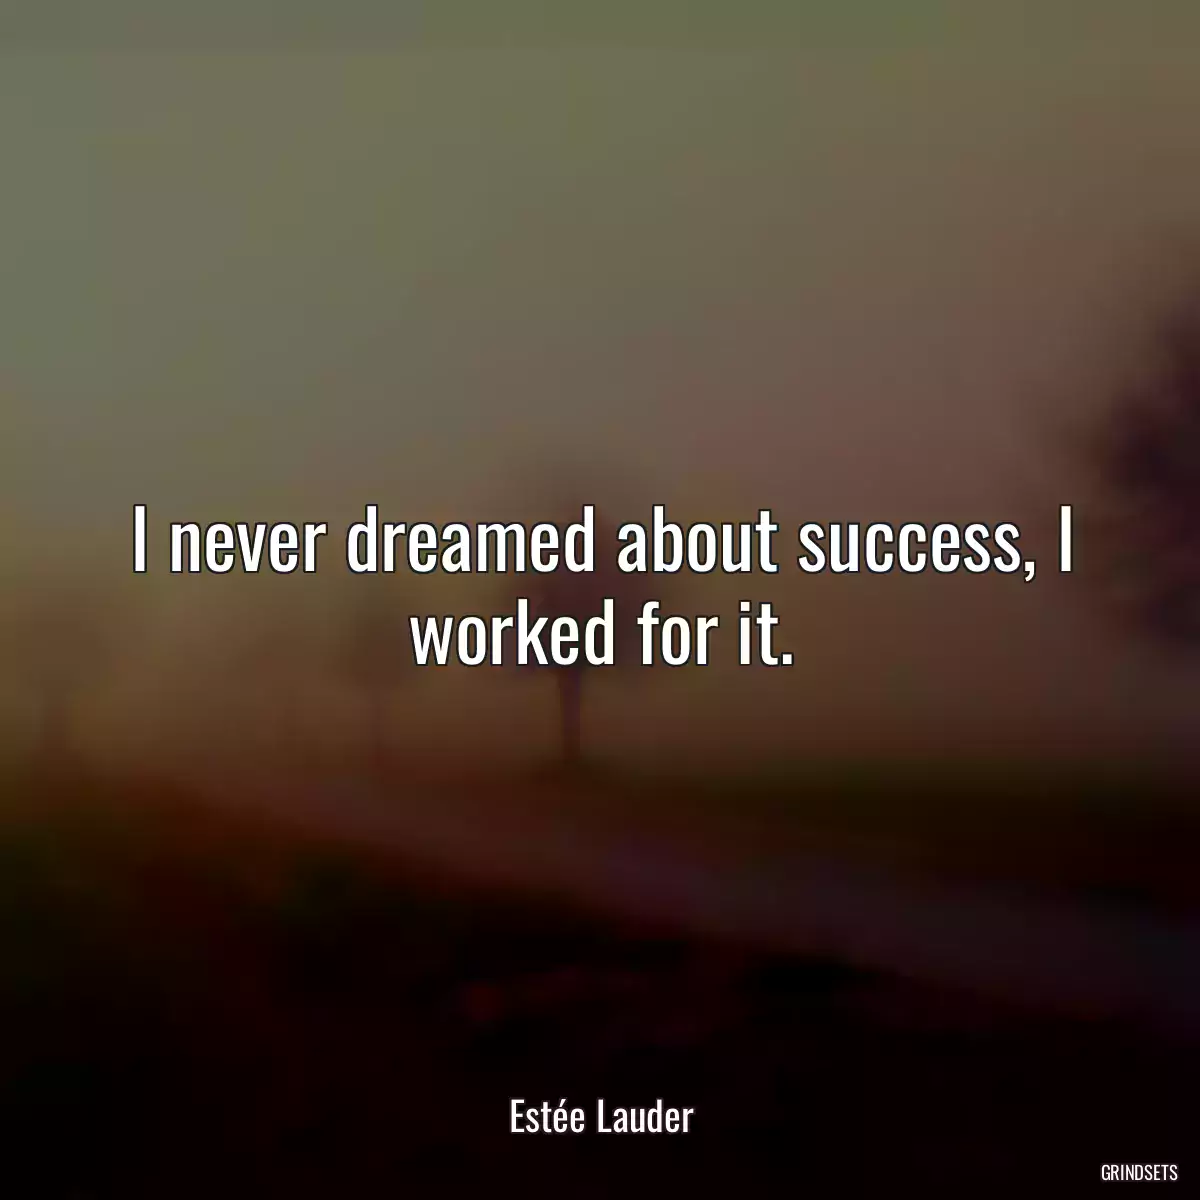 I never dreamed about success, I worked for it.